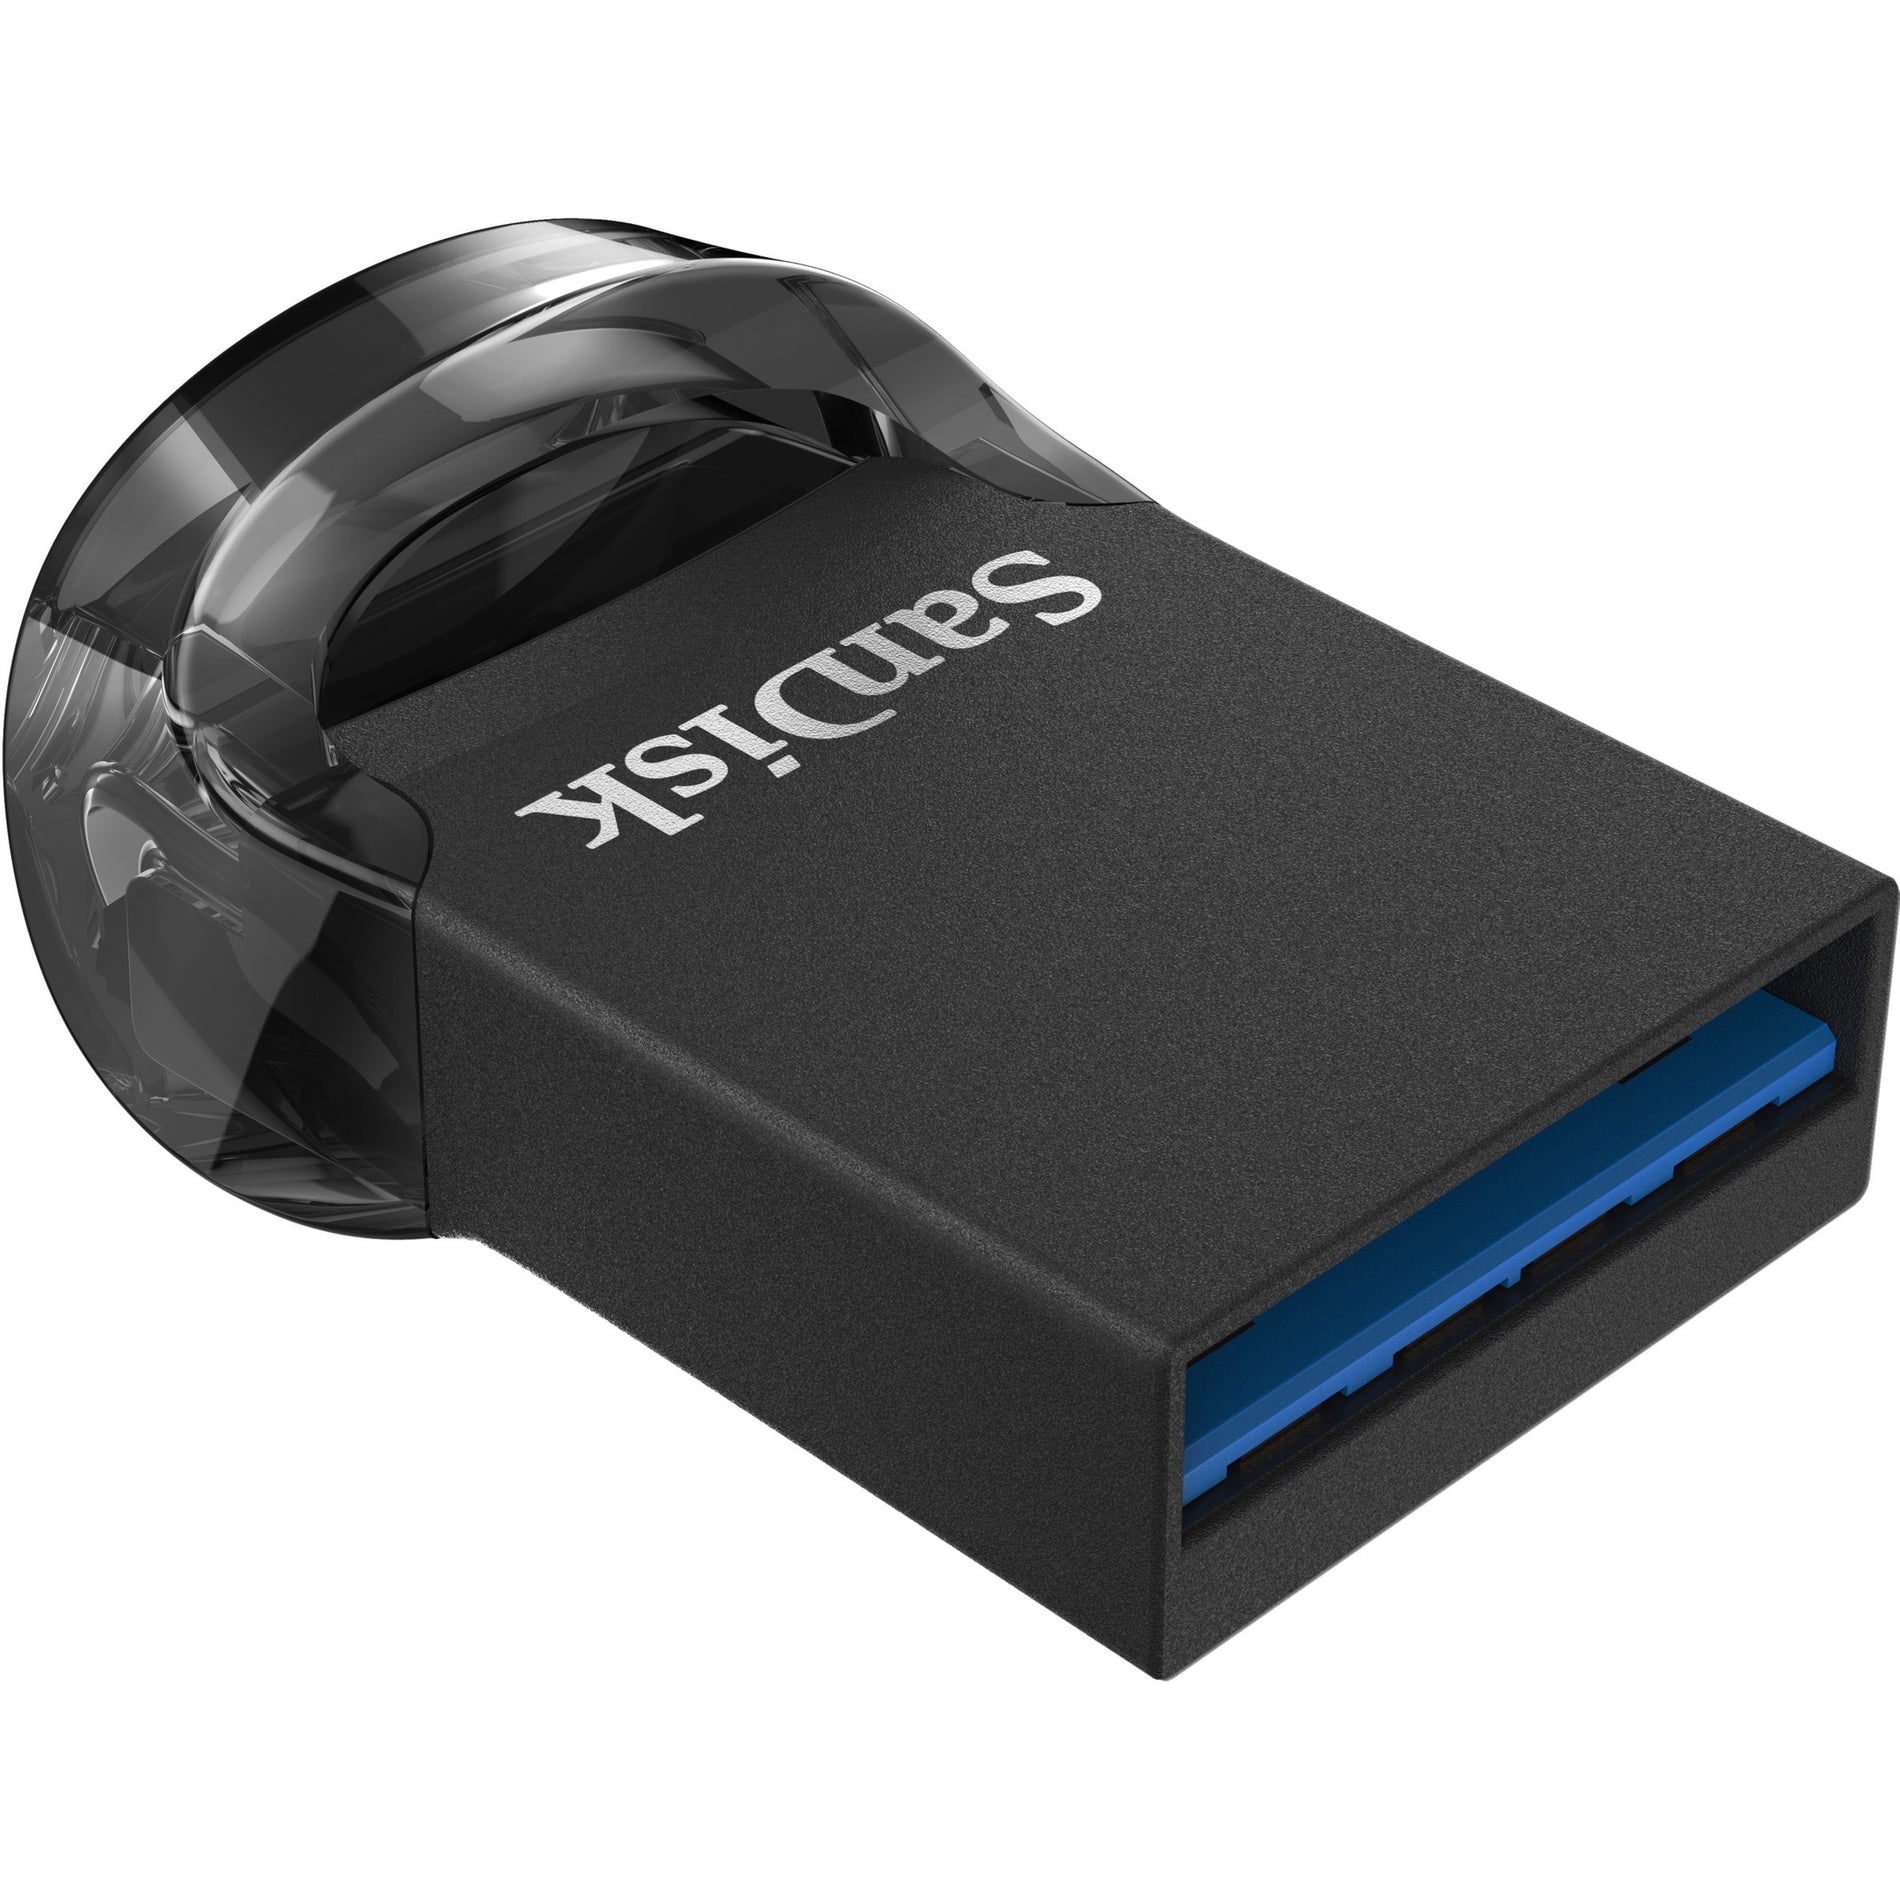 SanDisk SDCZ430-128G-A46 Ultra Fit USB 3.1 Flash Drive 128GB, High-Speed Data Transfer and Compact Design